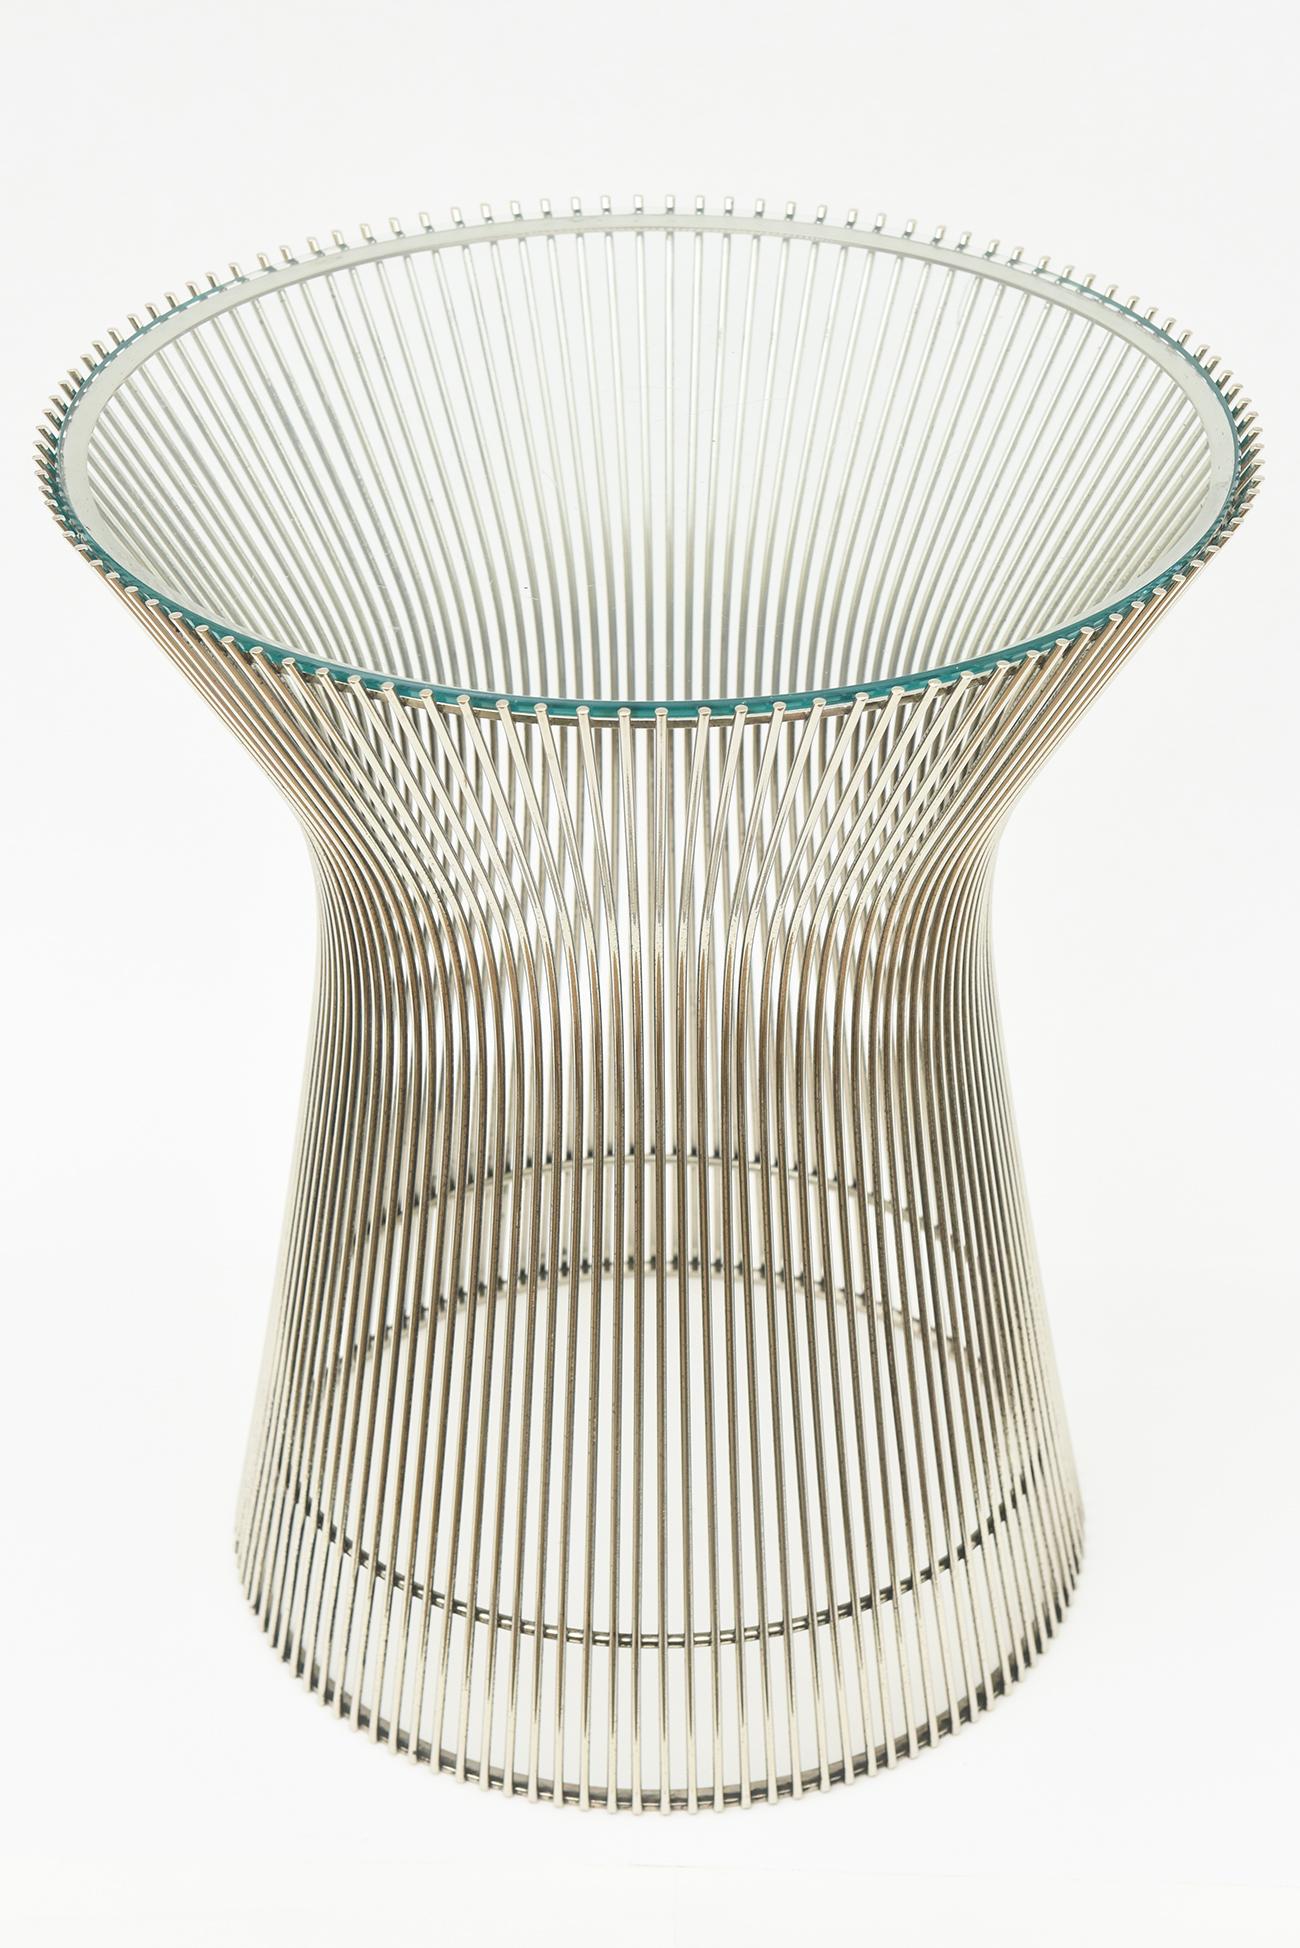 This very authentic vintage Mid-Century Modern iconic wire side table by Warren Platner is from the production of the 1950s. It had to be restored with new nickel plating as it would not polish from the rust. This is not a remake or reissue. Our